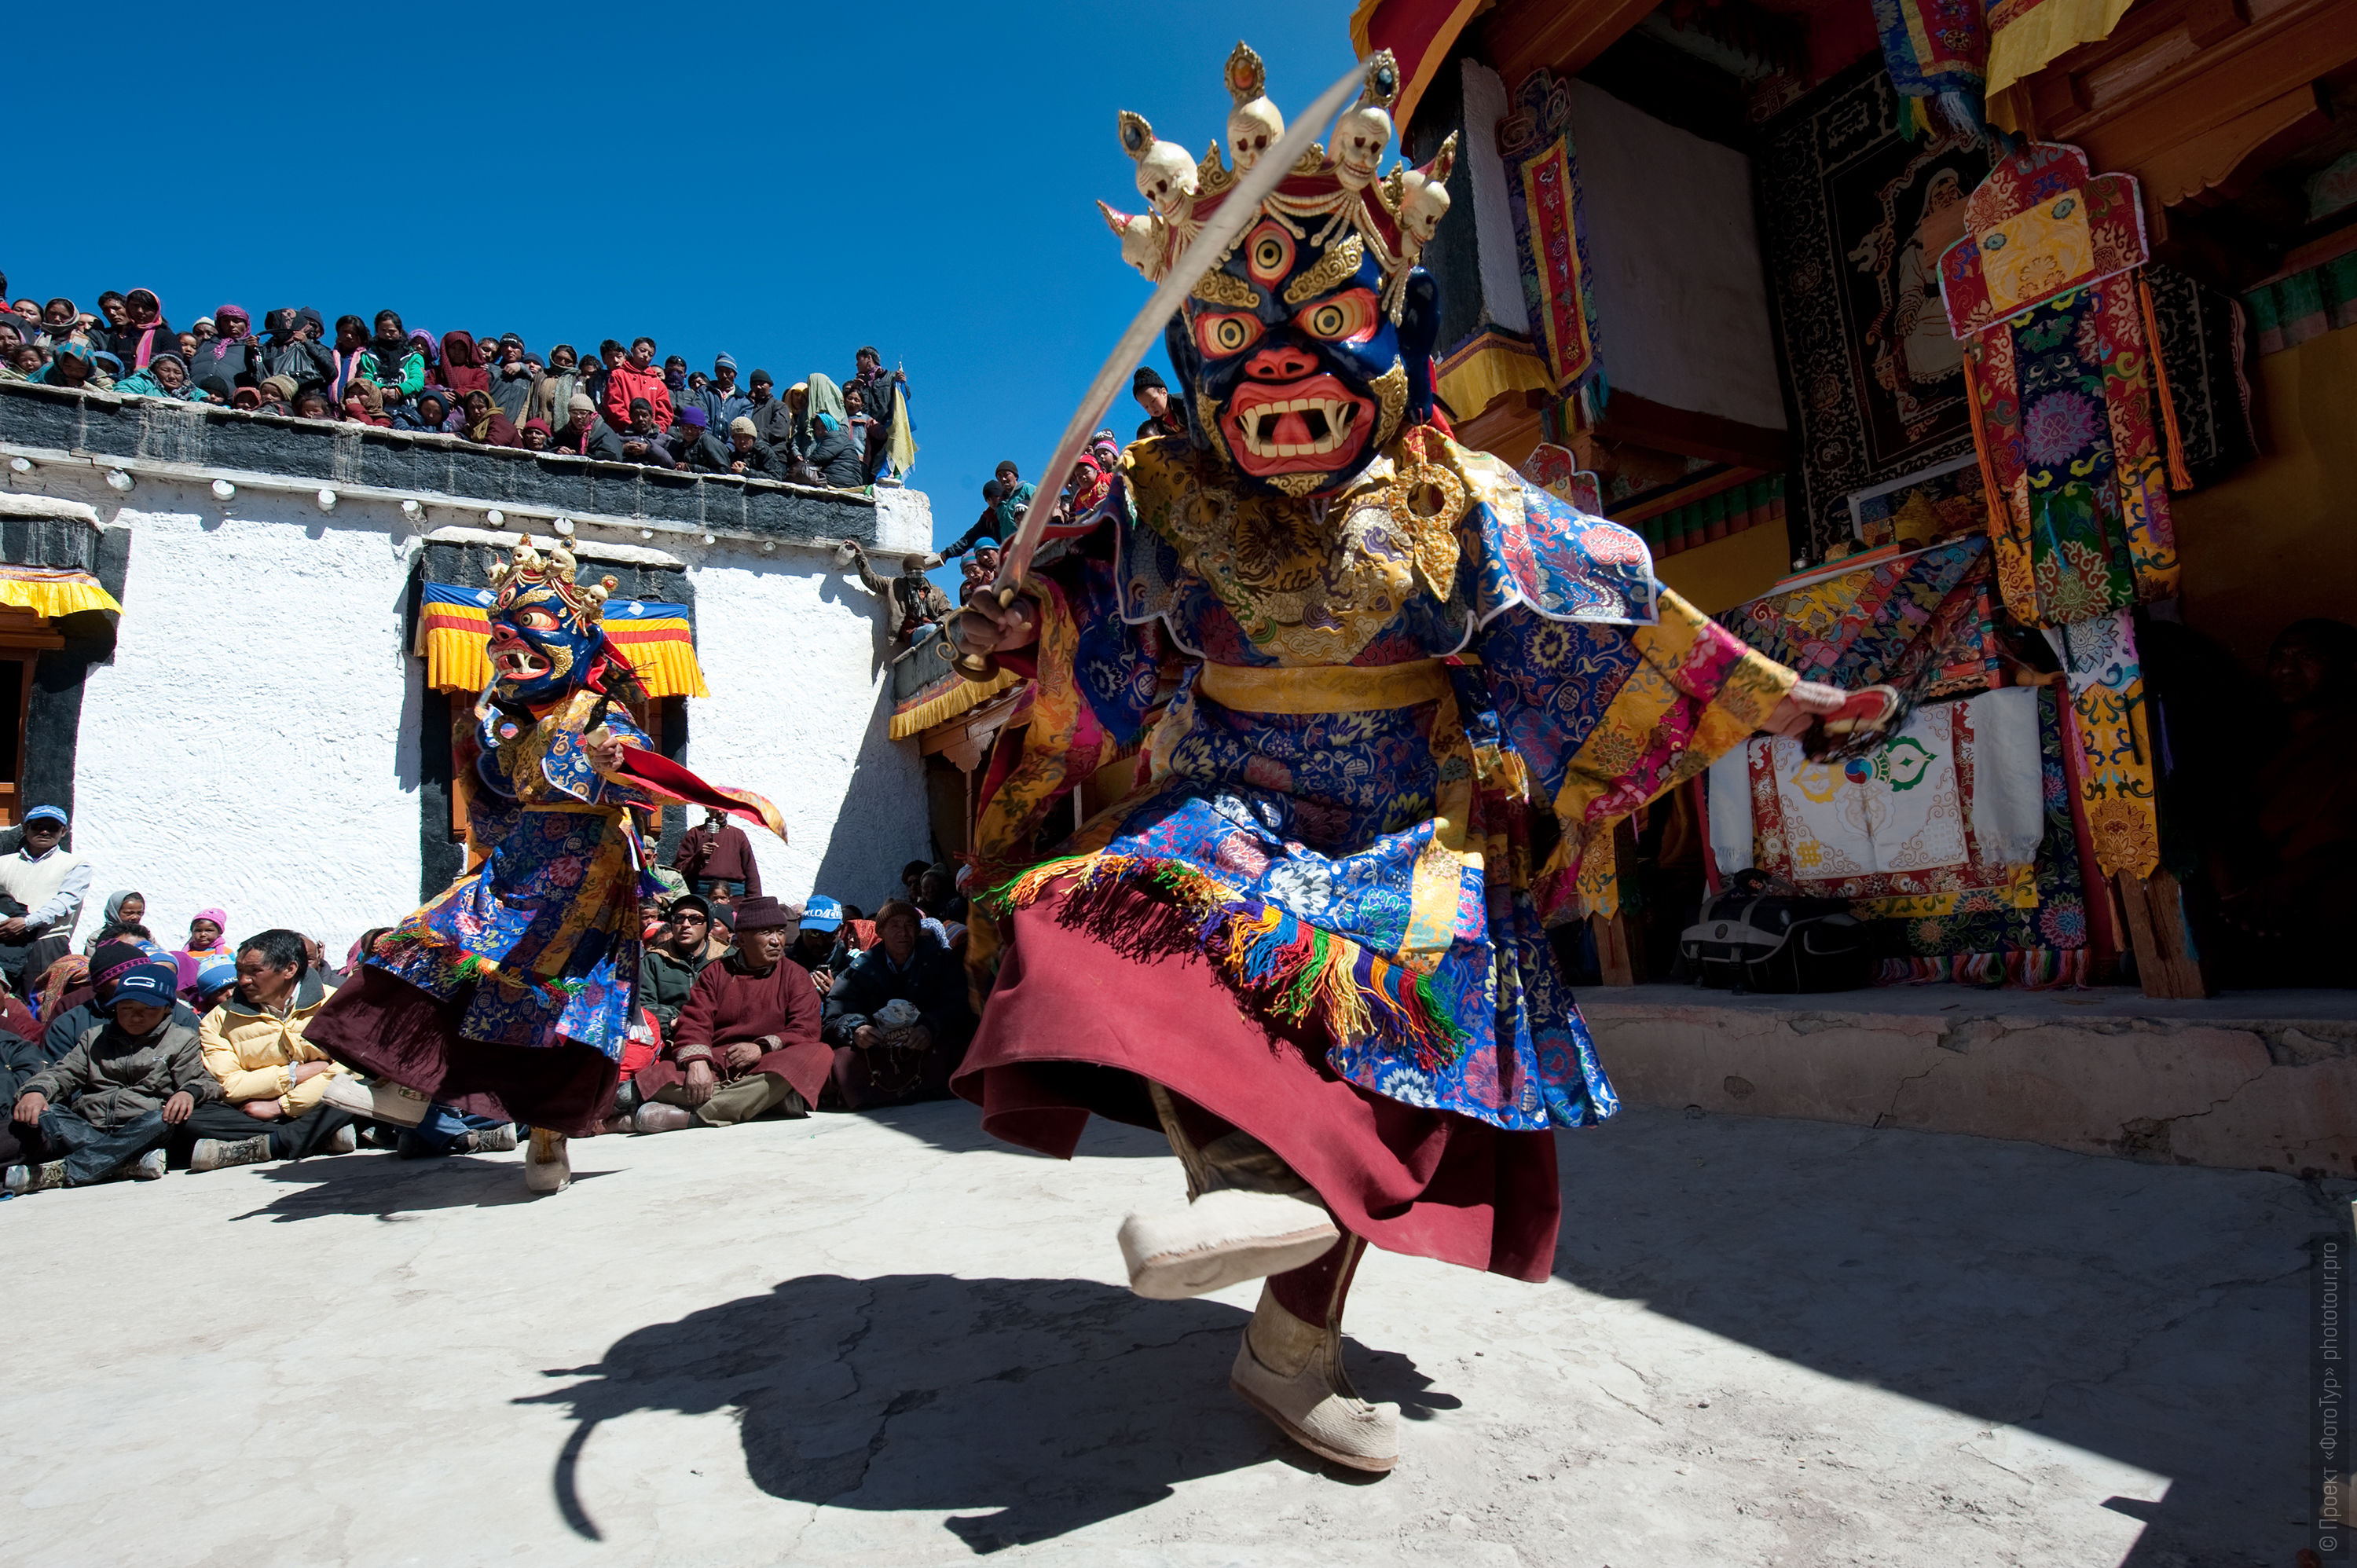 Skeleton Dance at the Stock Monastery. Photo tour to Tibet for the Winter Mysteries in Ladakh, Stok and Matho monasteries, 01.03. - 03/10/2020